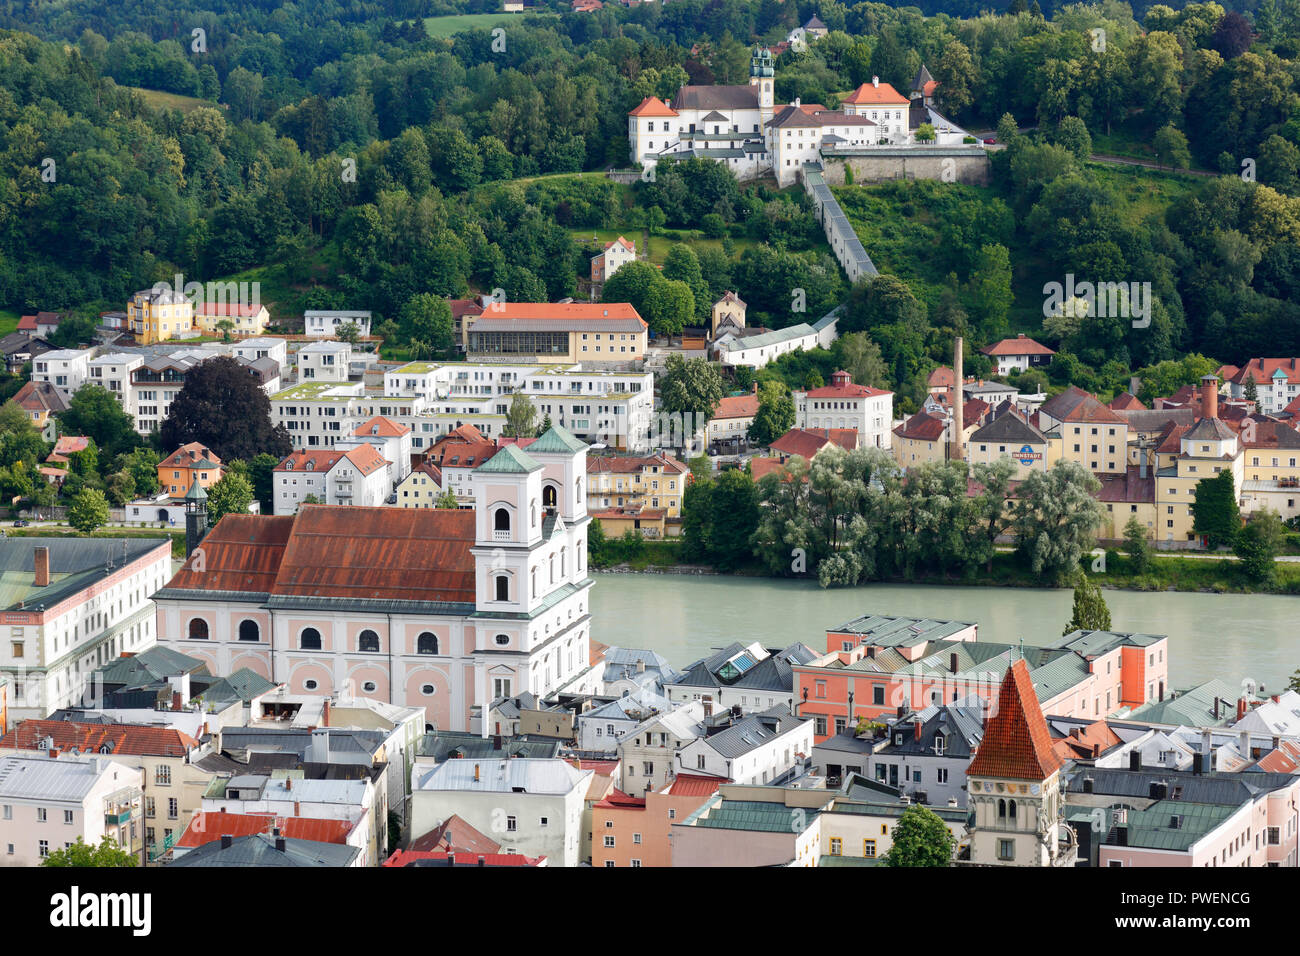 D-Passau, Danube, Inn, Ilz, panoramic view with Inn and old town, Monastery Niedernburg with tomb of the Blessed Gisella, former Benedictine nun monastery, behind pilgrimage church and monastery Saint Mary Help, baroque, river landscape, Inn landscape Stock Photo